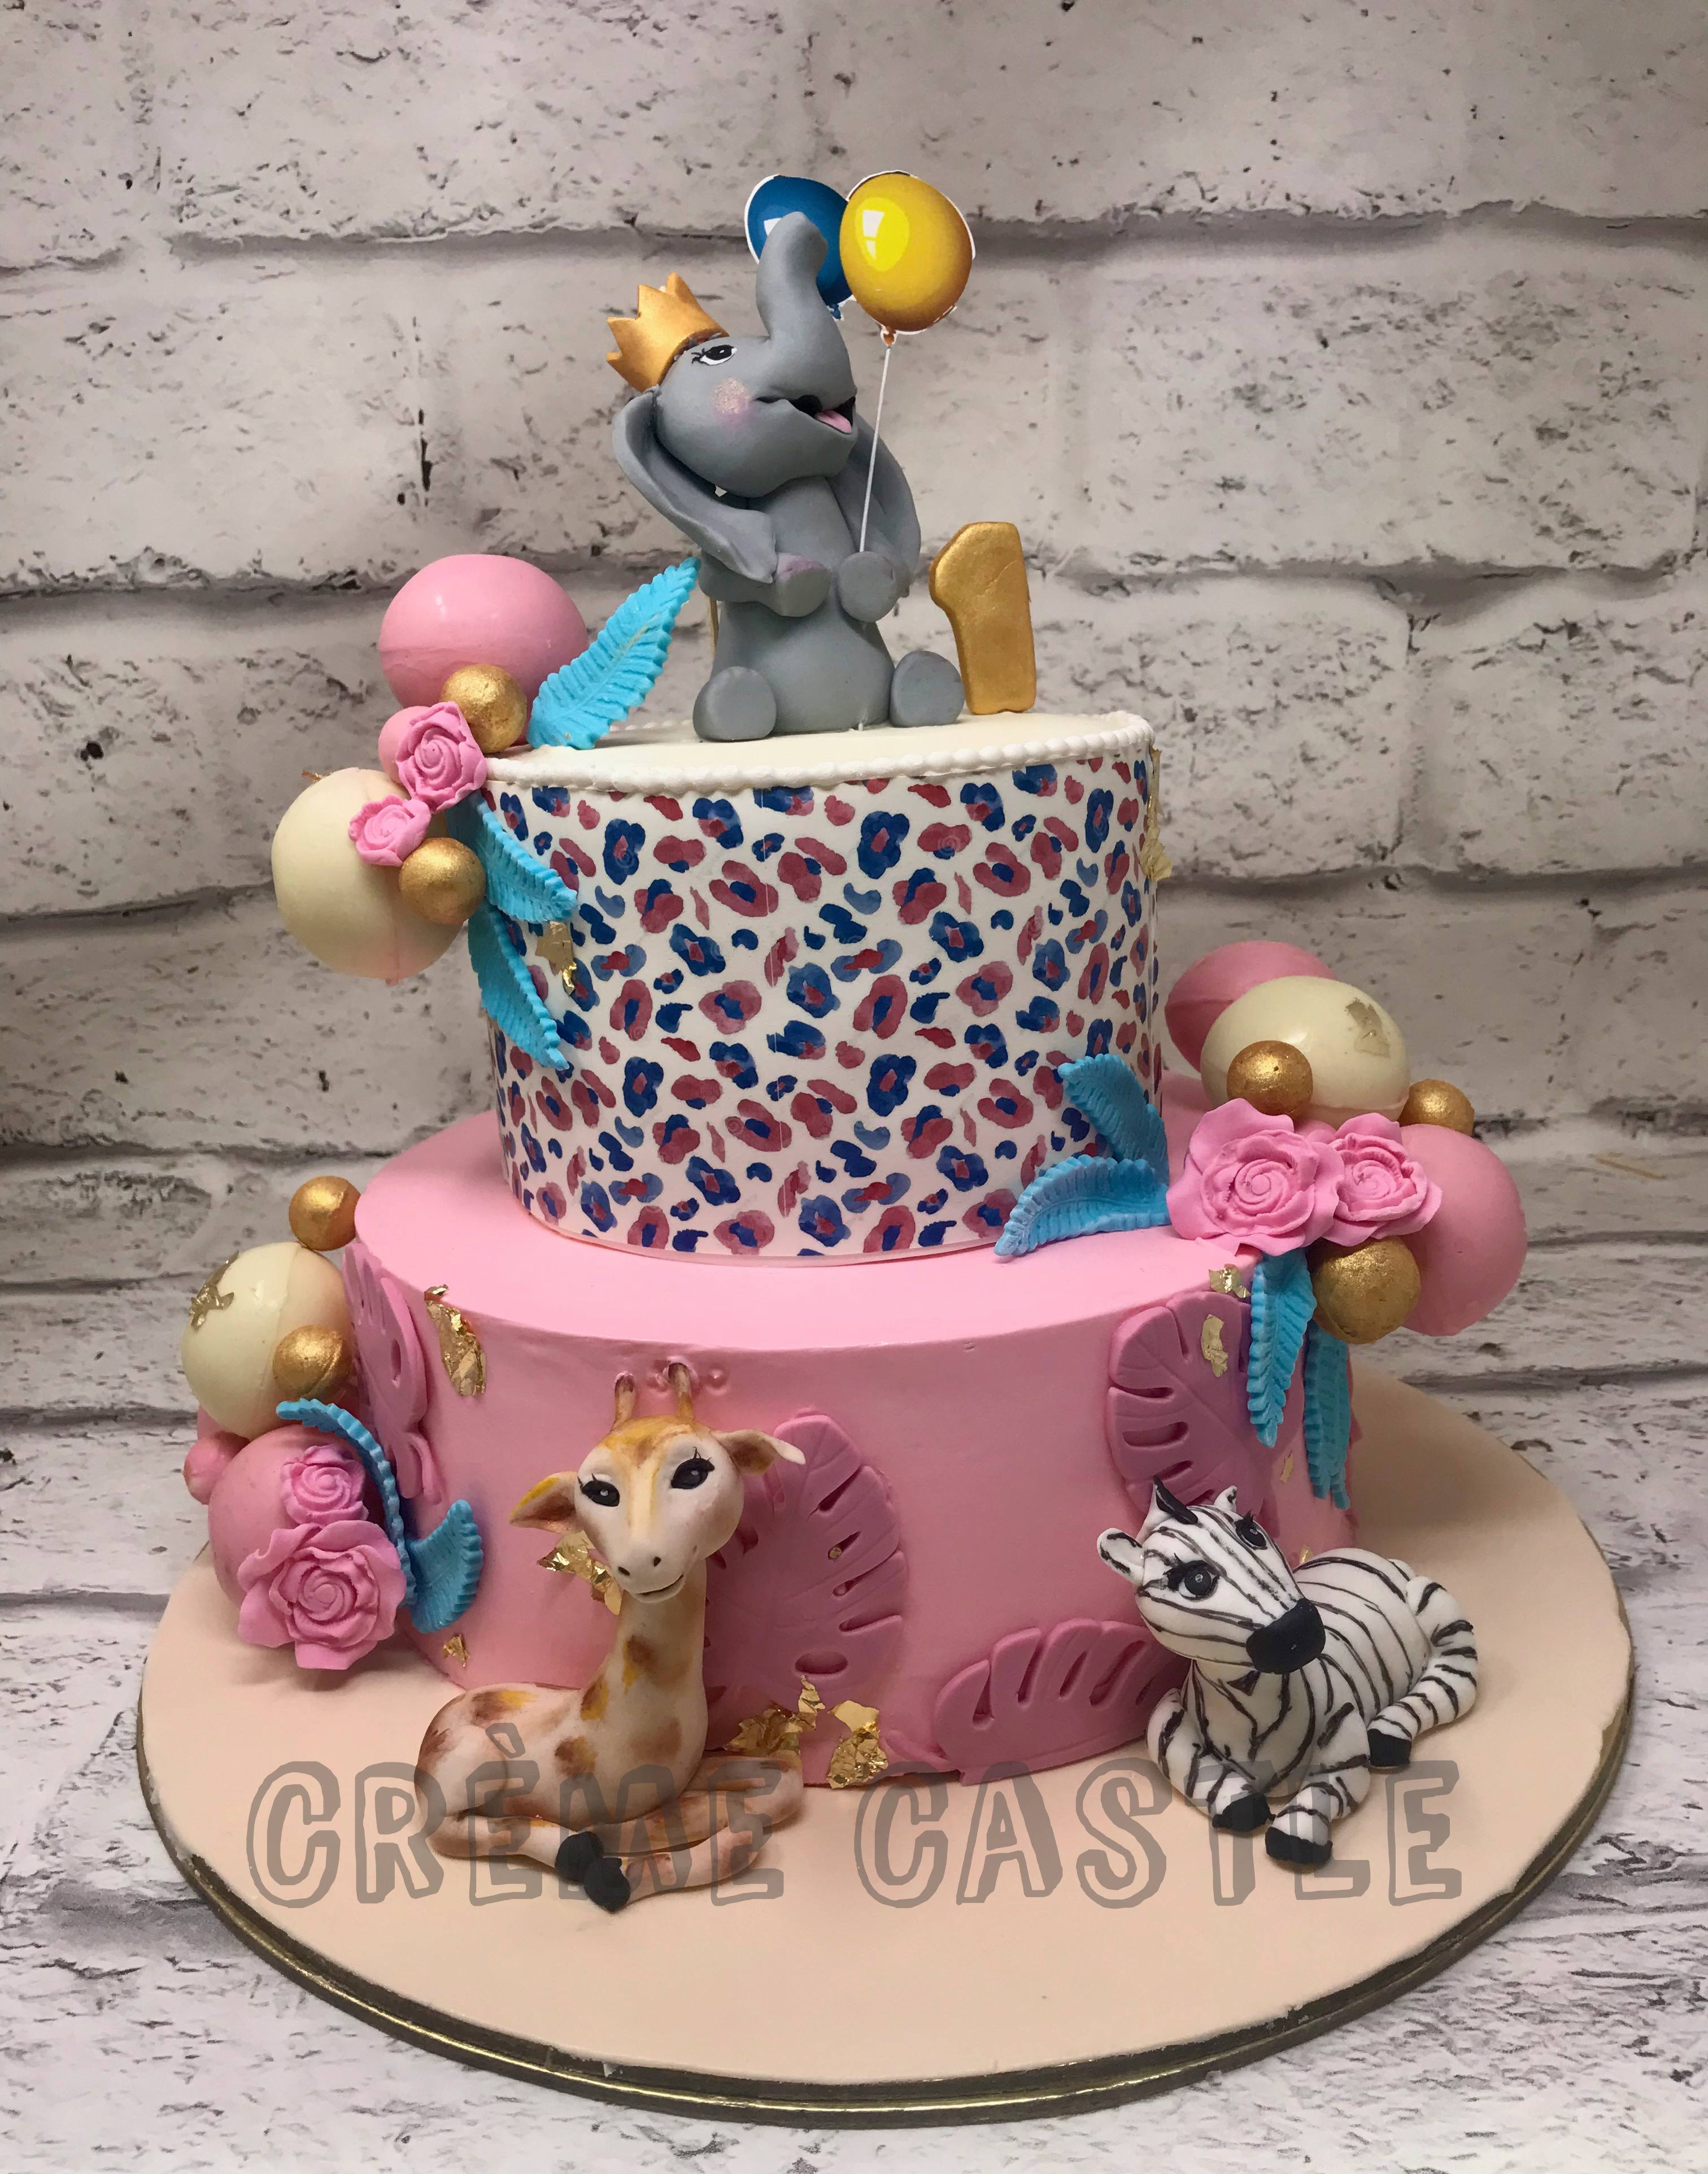 Masters Cakes - 3 tier pastel colour circus cake. Happy 1st Birthday Ezme  from Masters Cakes. | Facebook